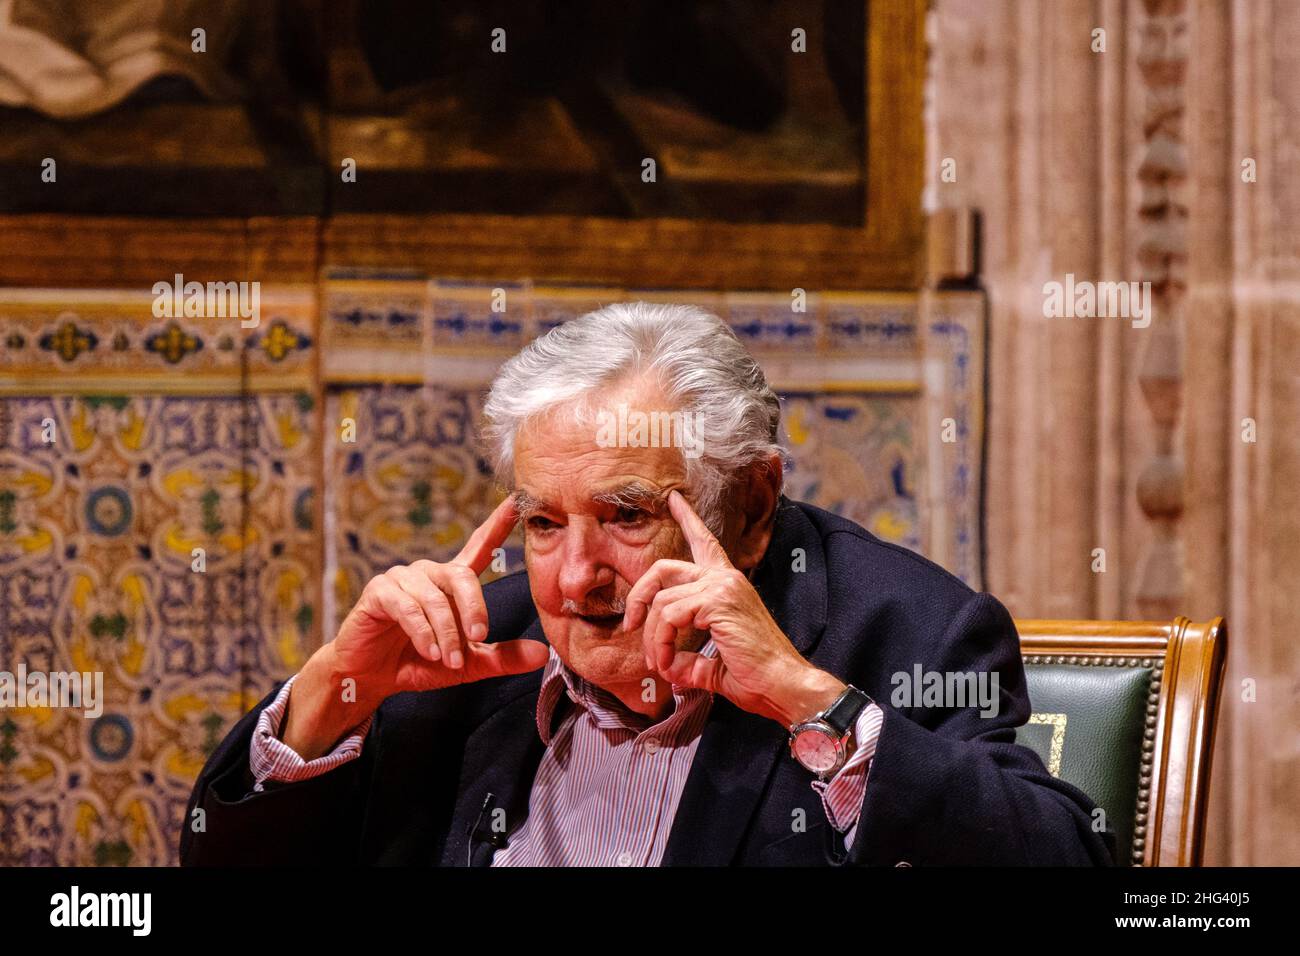 Valencia, Spain; 4th February 2020: The former President of Uruguay José Mujica is invited to the Palau de la Generalitat Valenciana during his visit Stock Photo